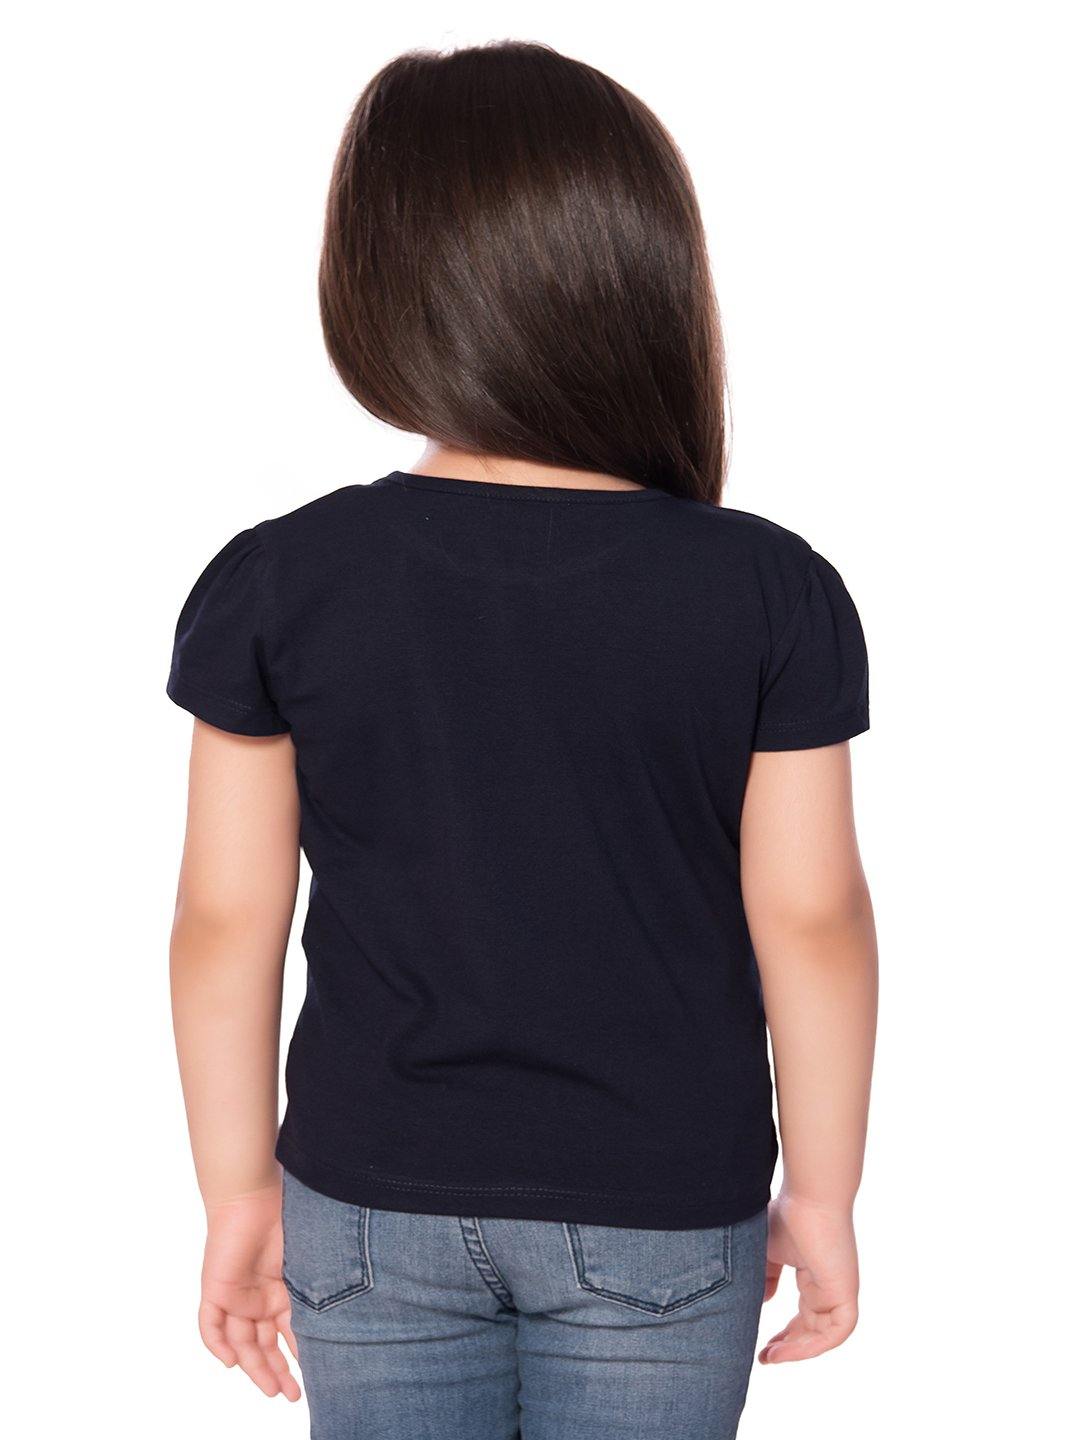 Tiny Baby Navy Blue Colored Top - T-106 Navy Blue - TINY BABY INDIA shop.tinybaby.in